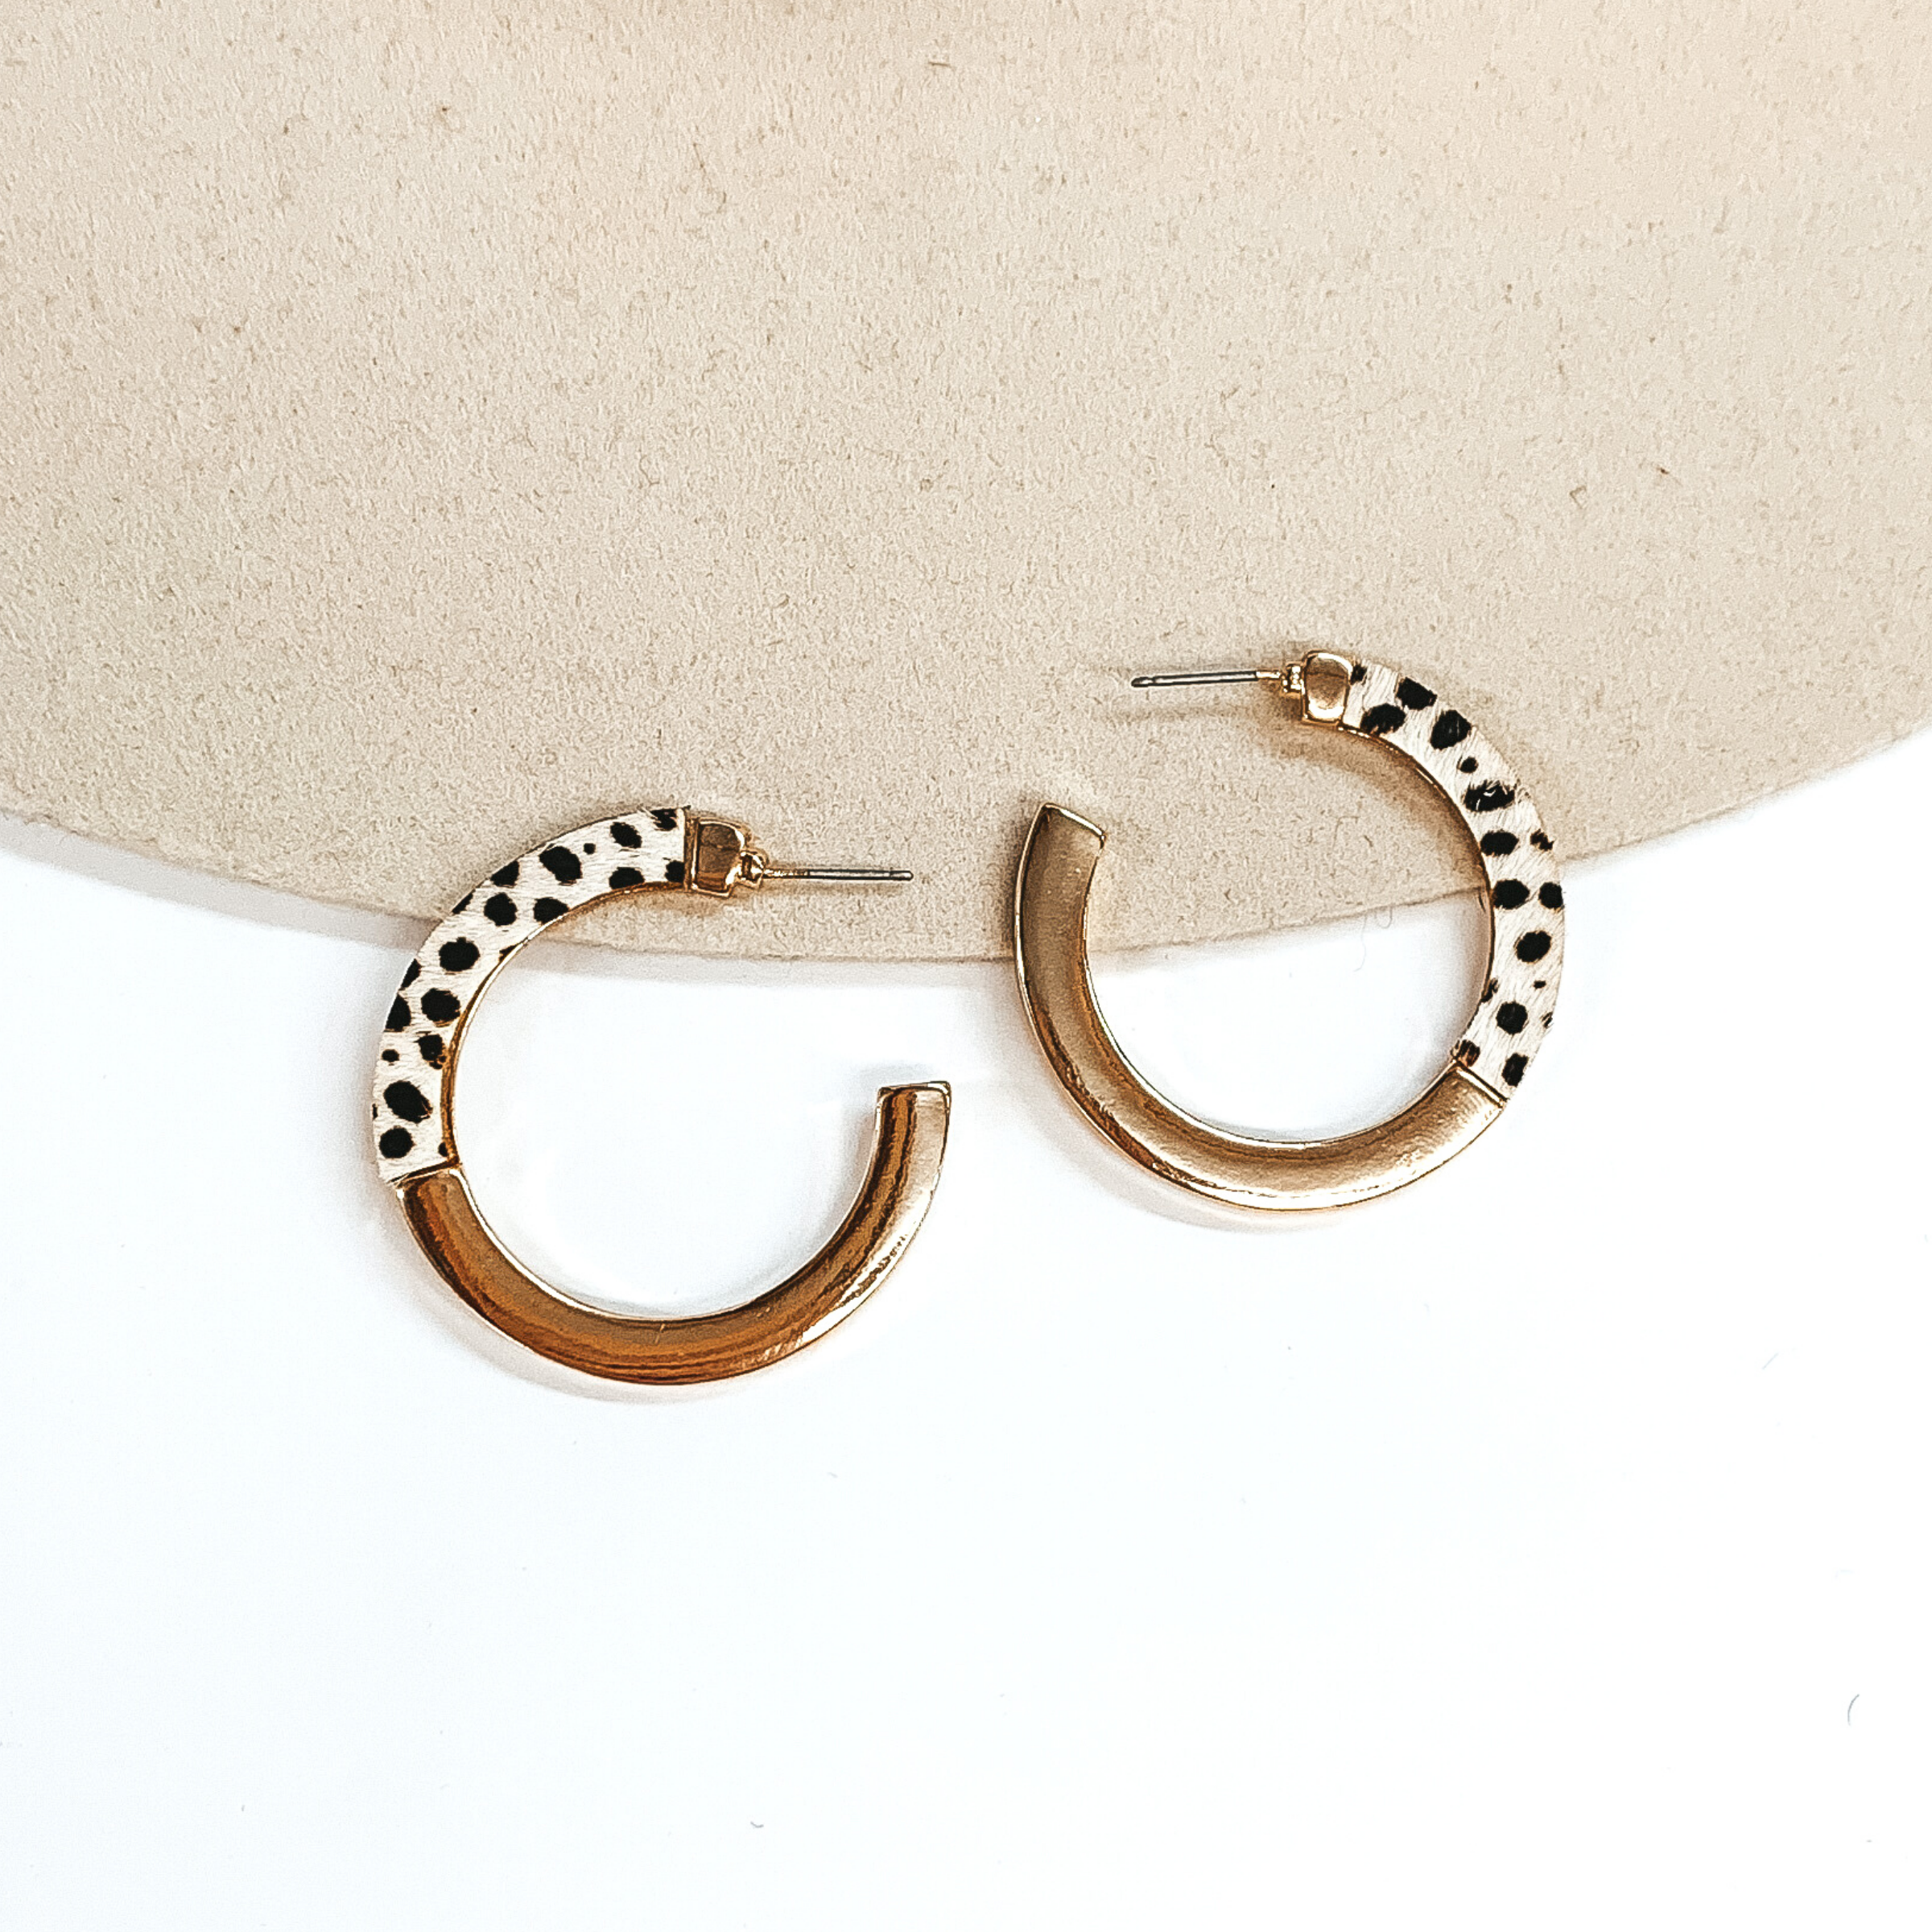 Flat hoops that are half gold and half ivory with a black cheetah print. These earrings are pictured on a white and beige background.